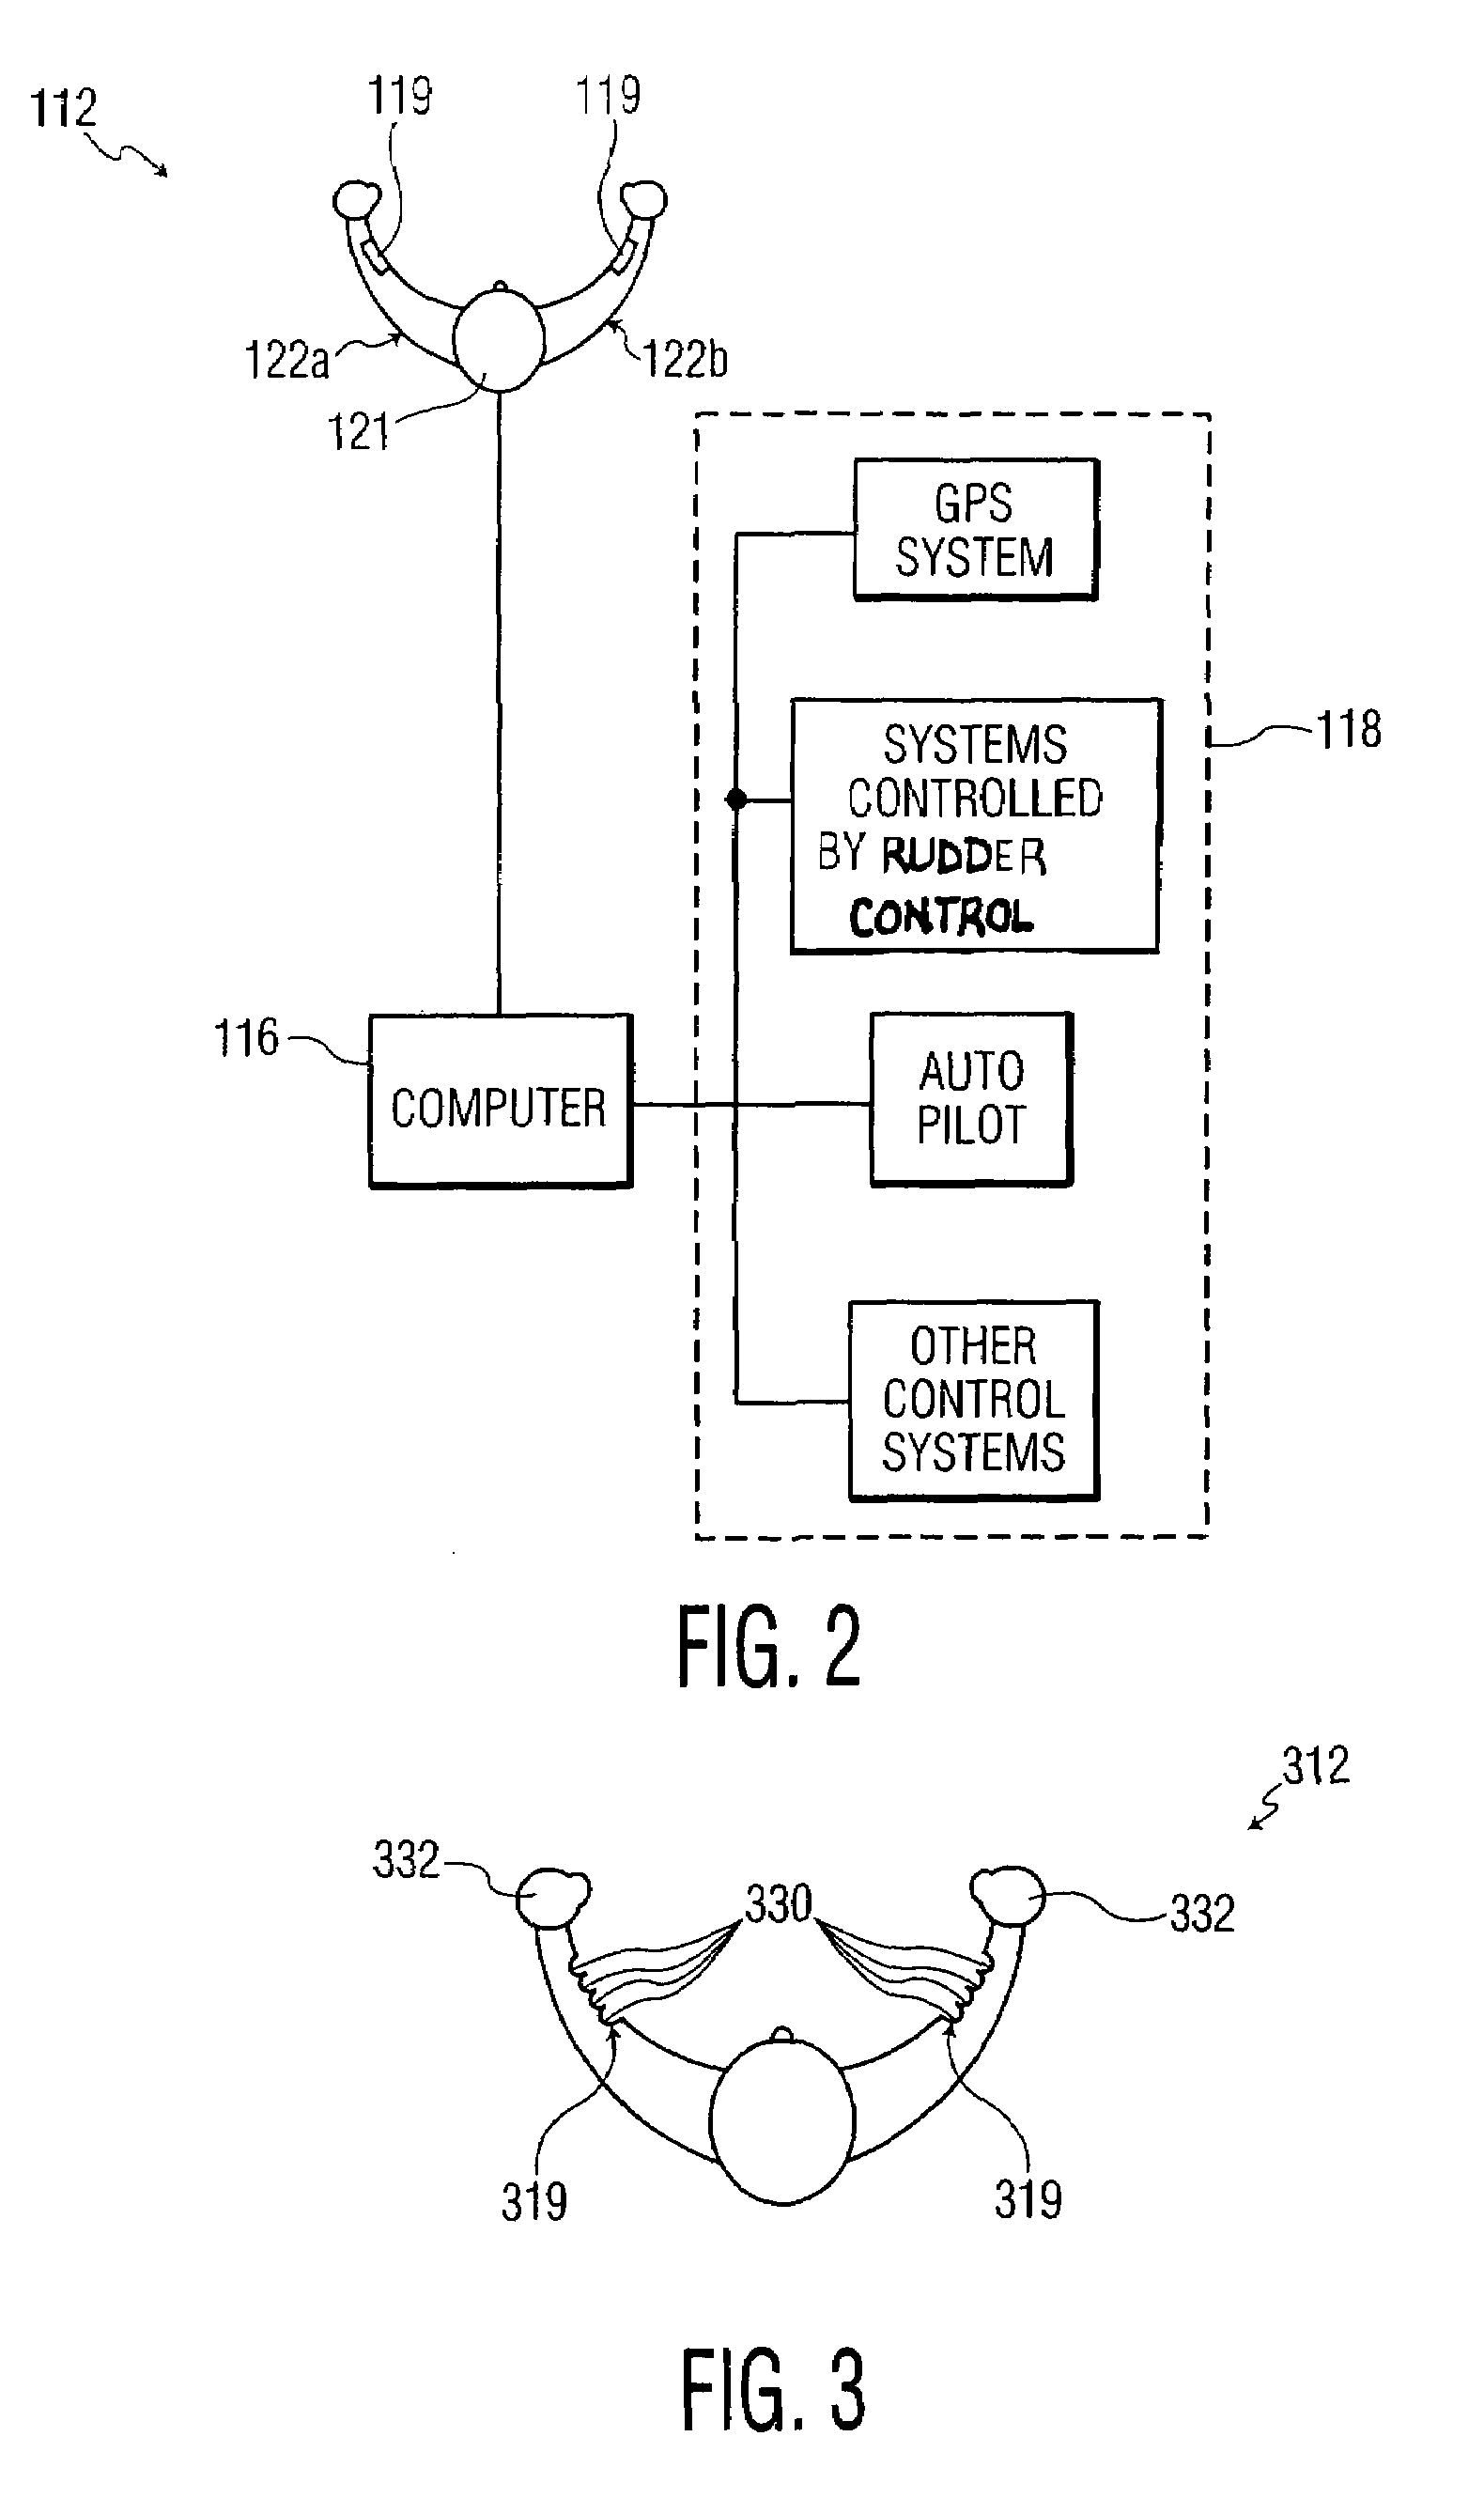 Apparatus, system and method for aircraft security